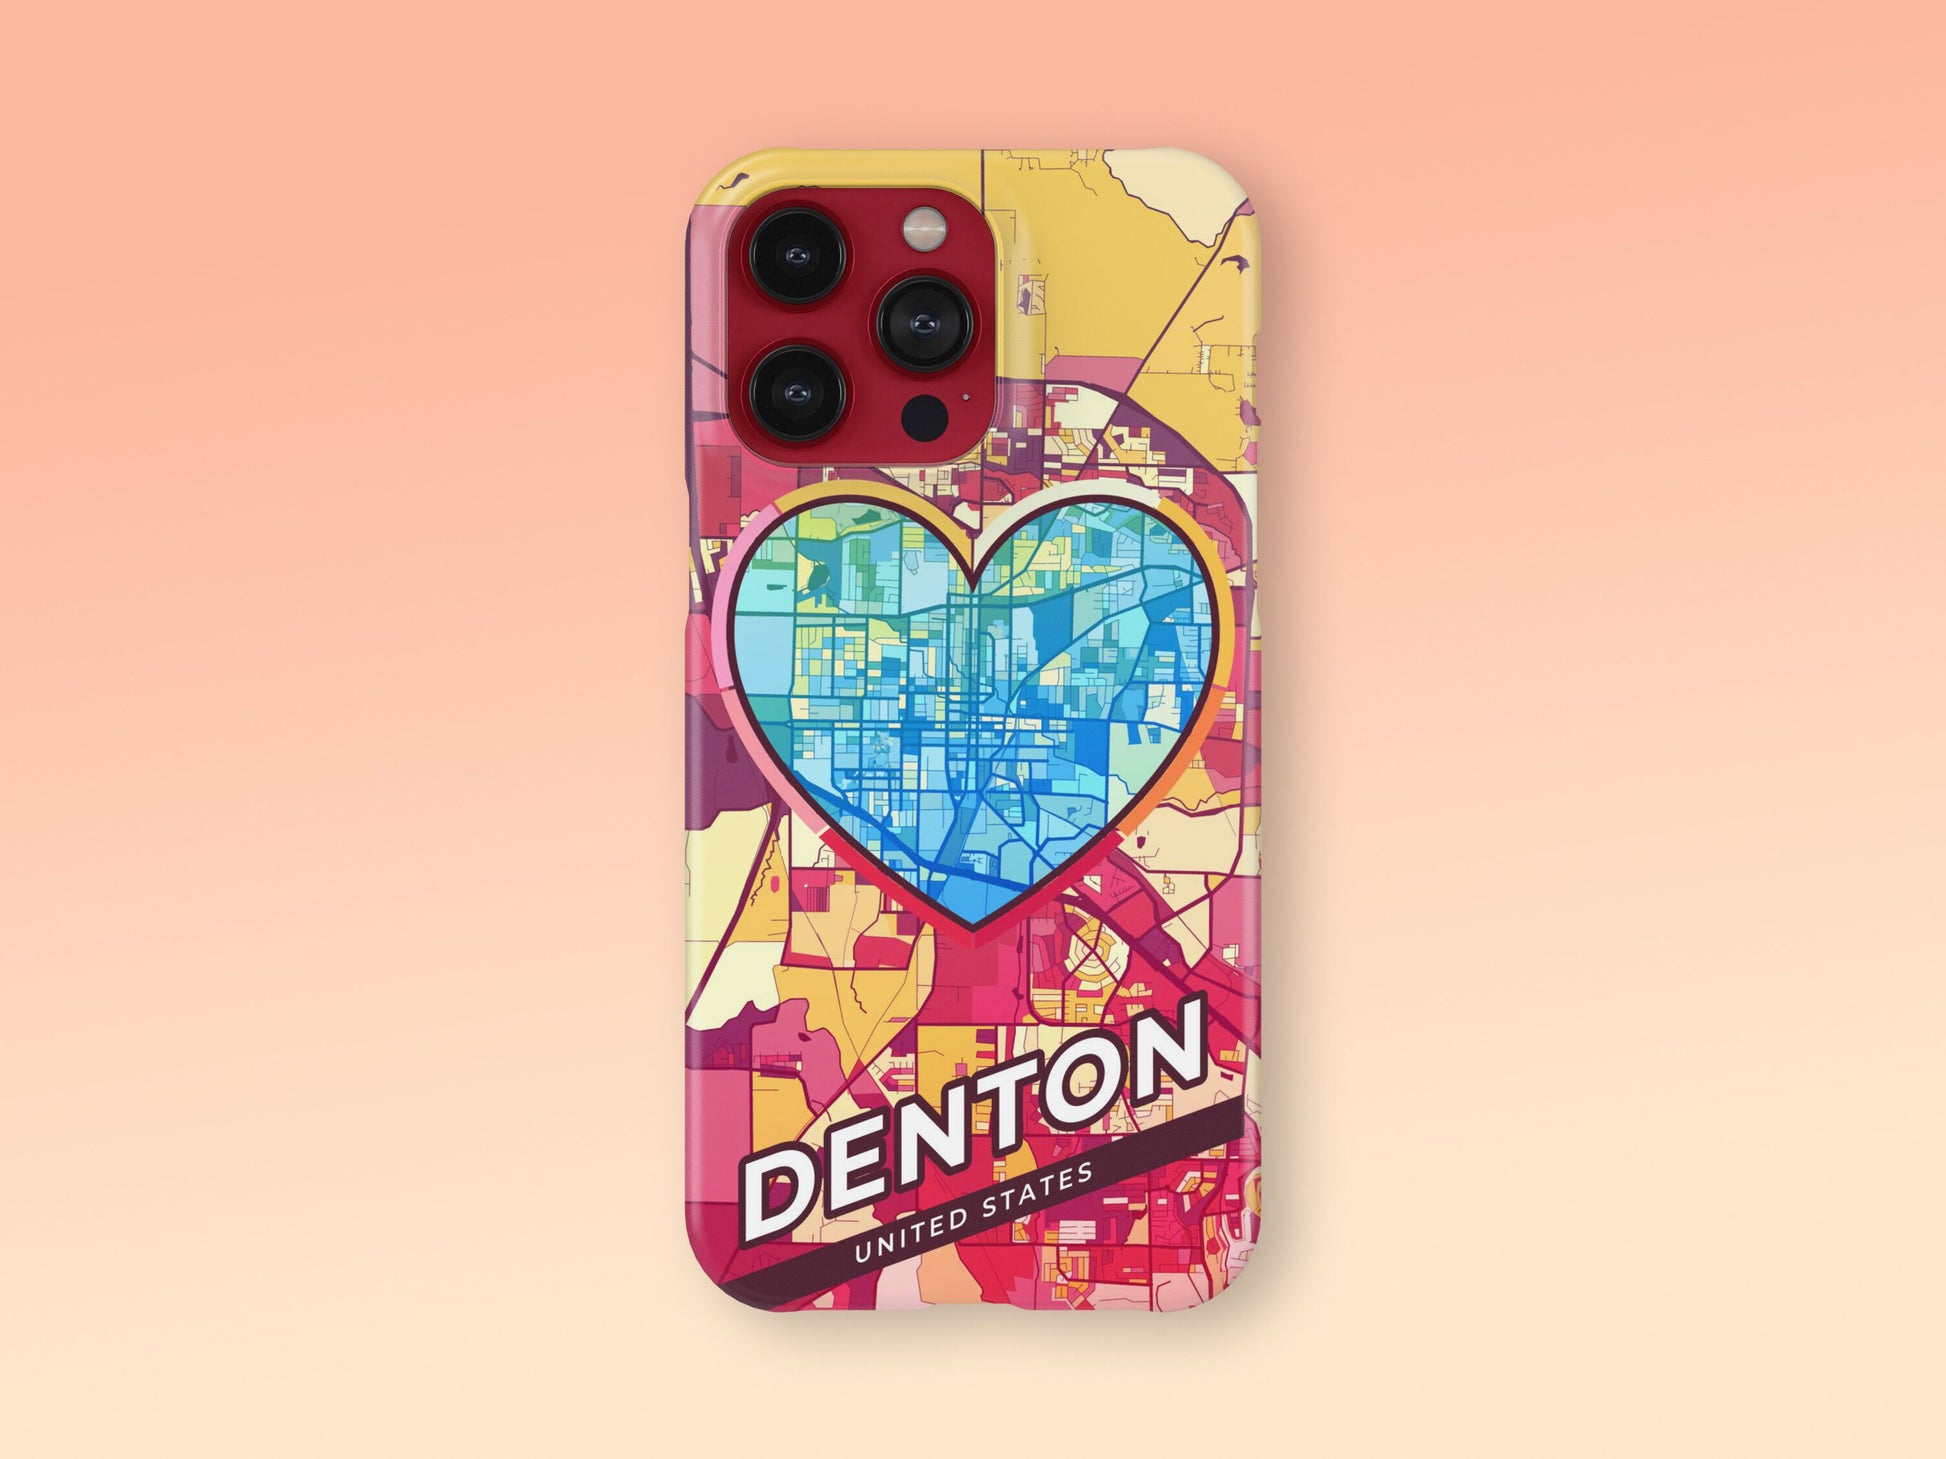 Denton Texas slim phone case with colorful icon. Birthday, wedding or housewarming gift. Couple match cases. 2